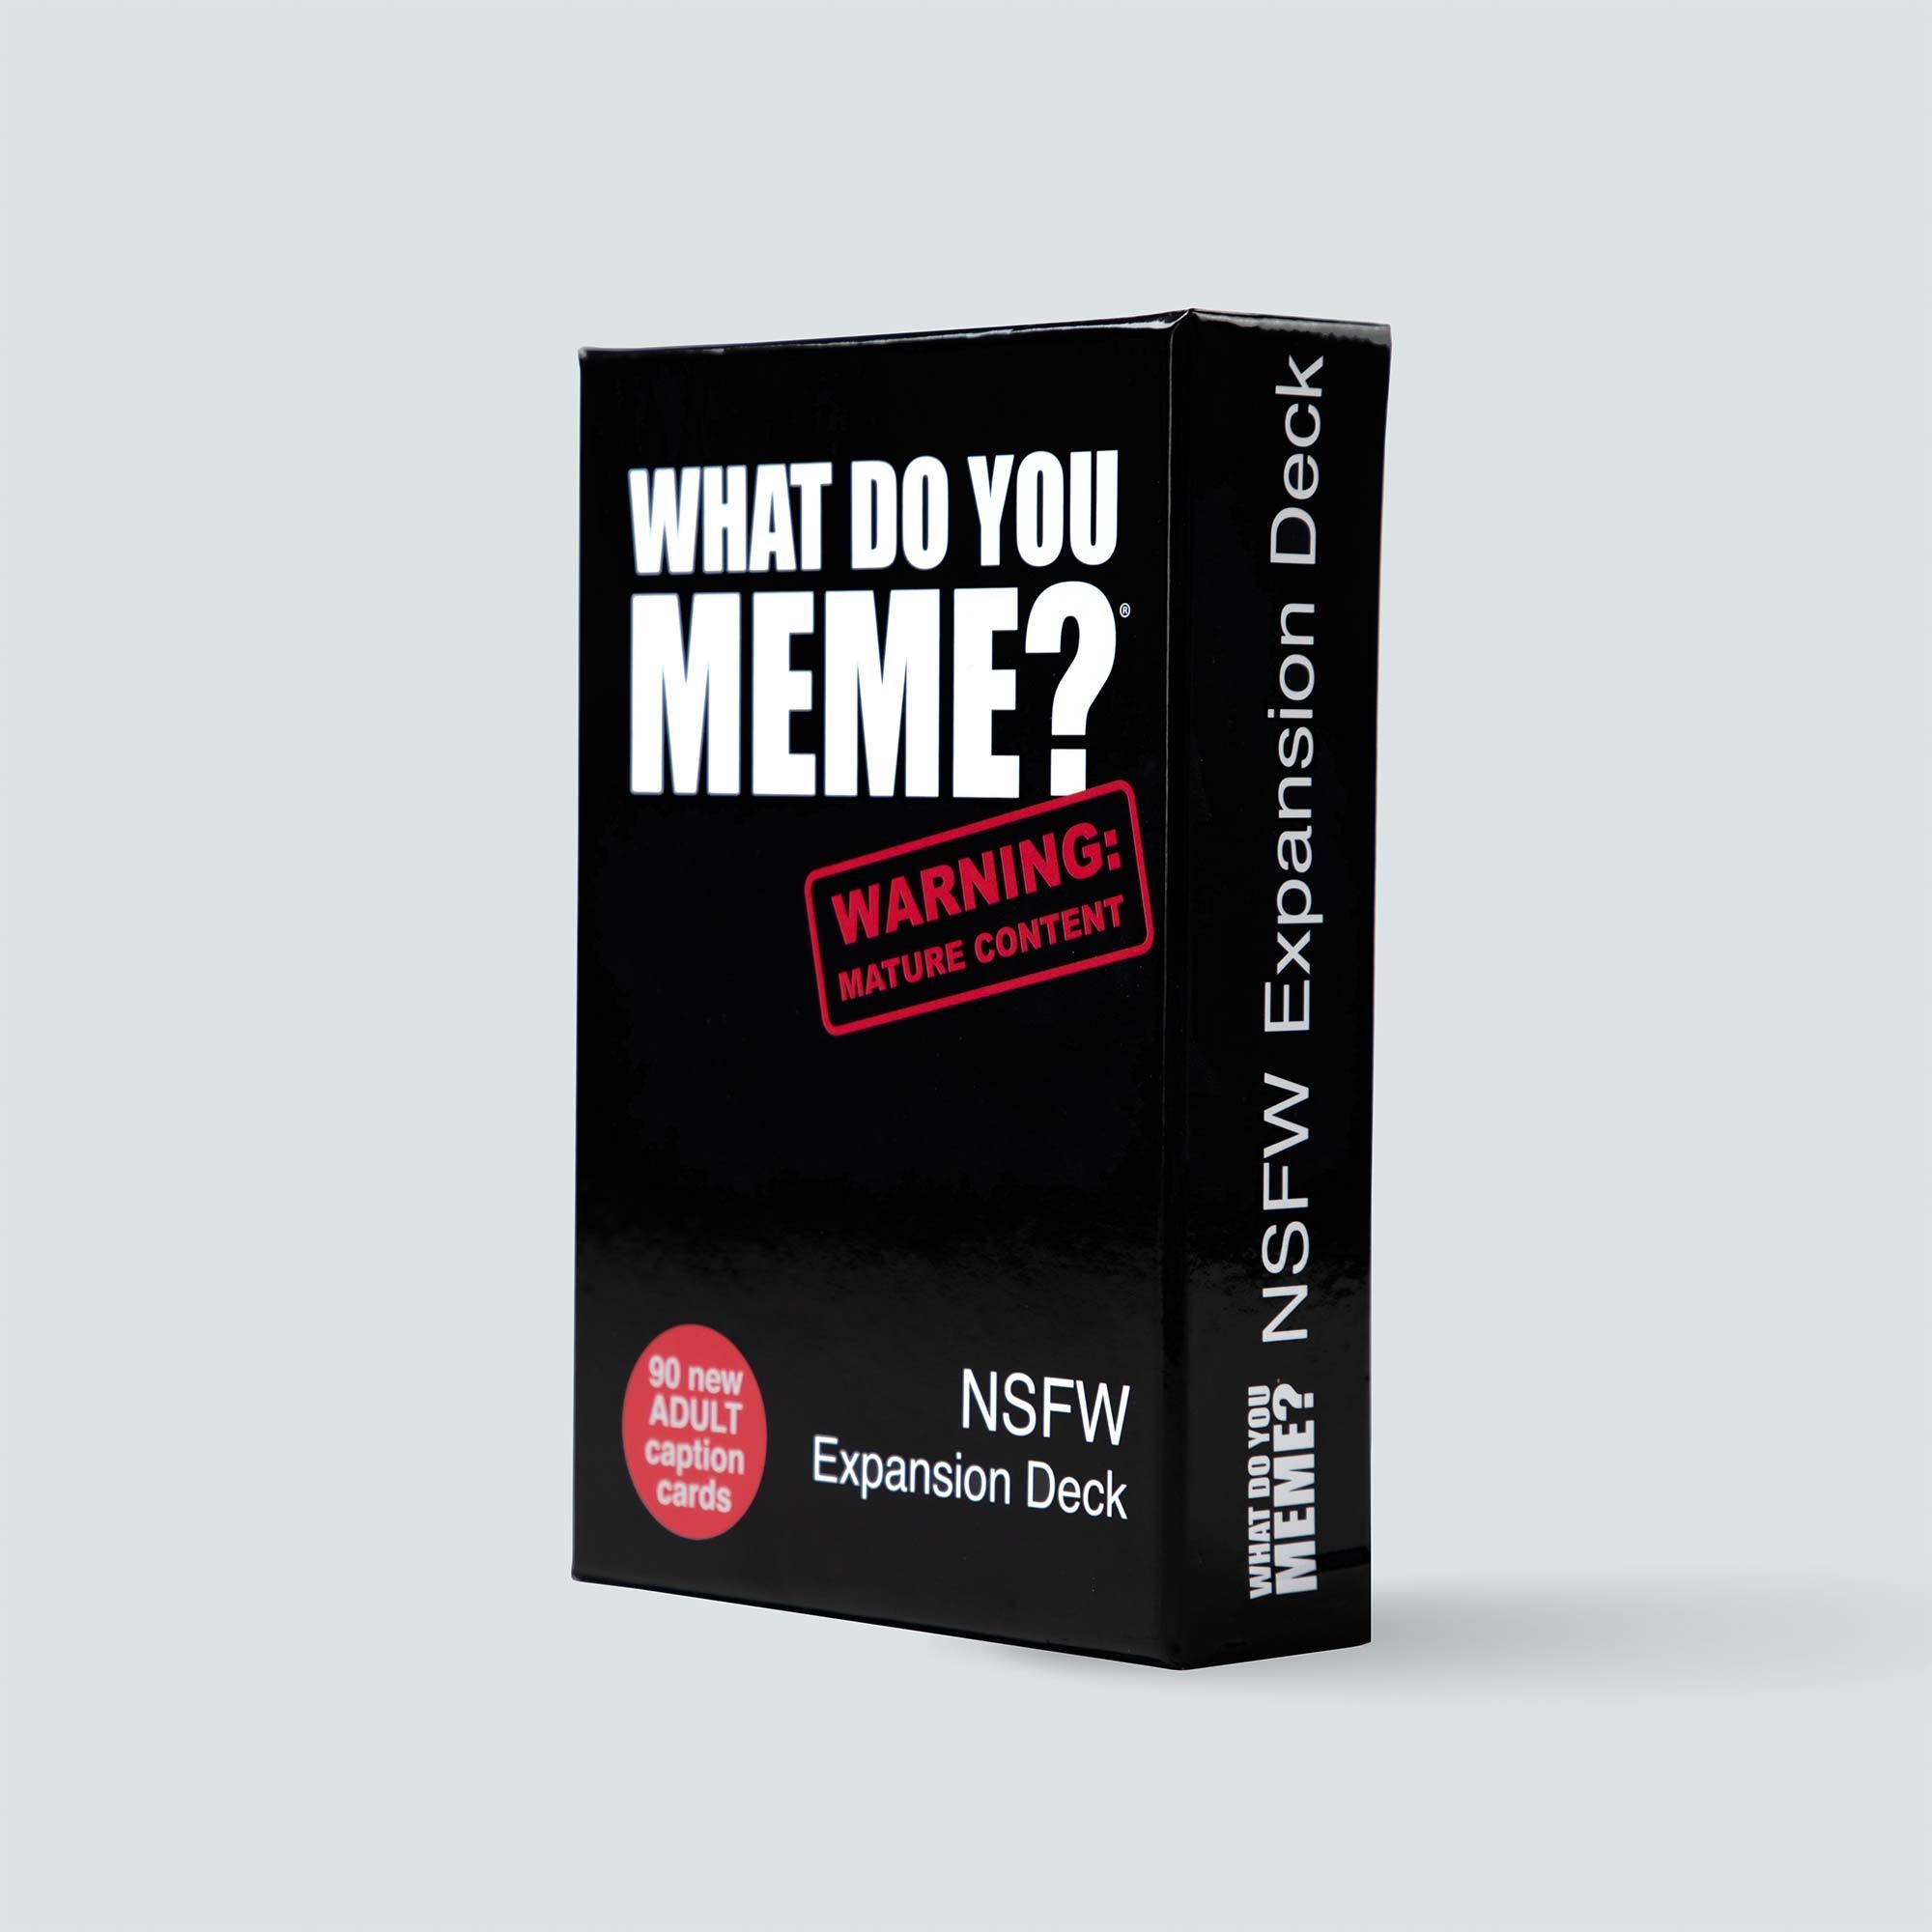 nsfw-expansion-pack-game-box-and-game-play-03-what-do-you-meme-by-relatable